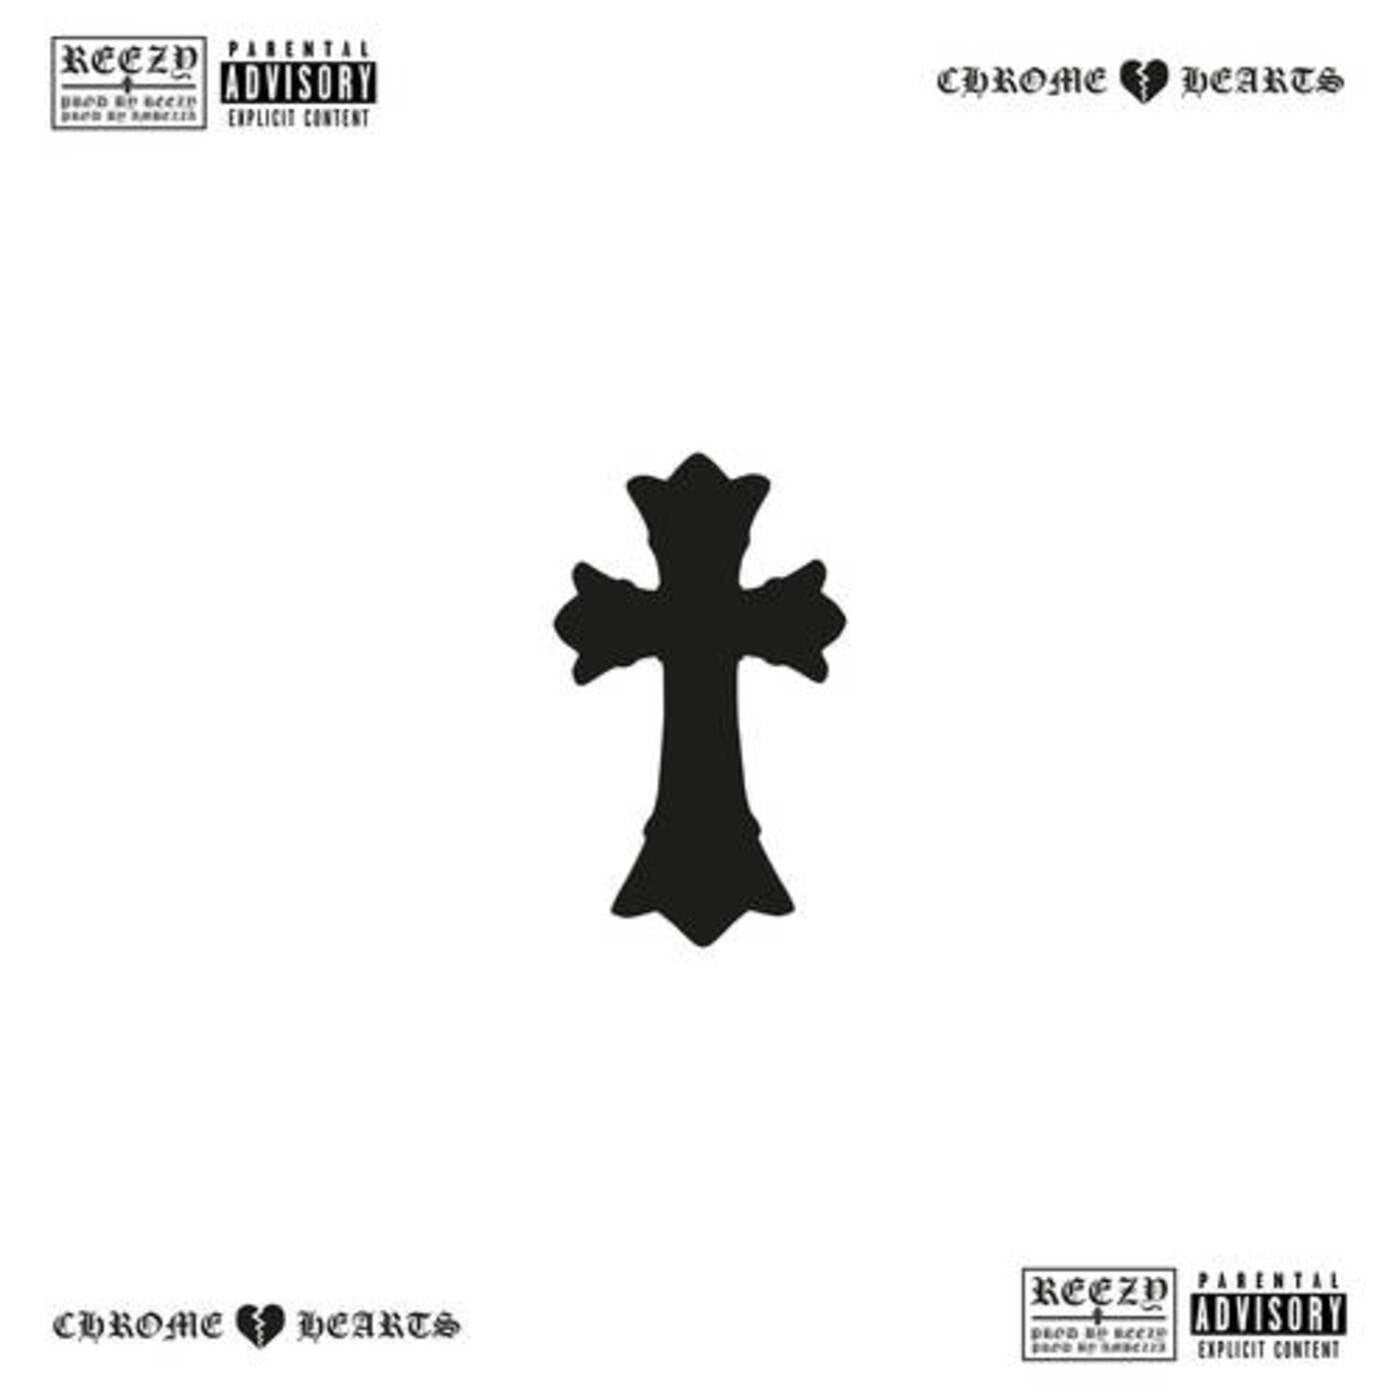 CHROME HEARTS by reezy on Beatsource